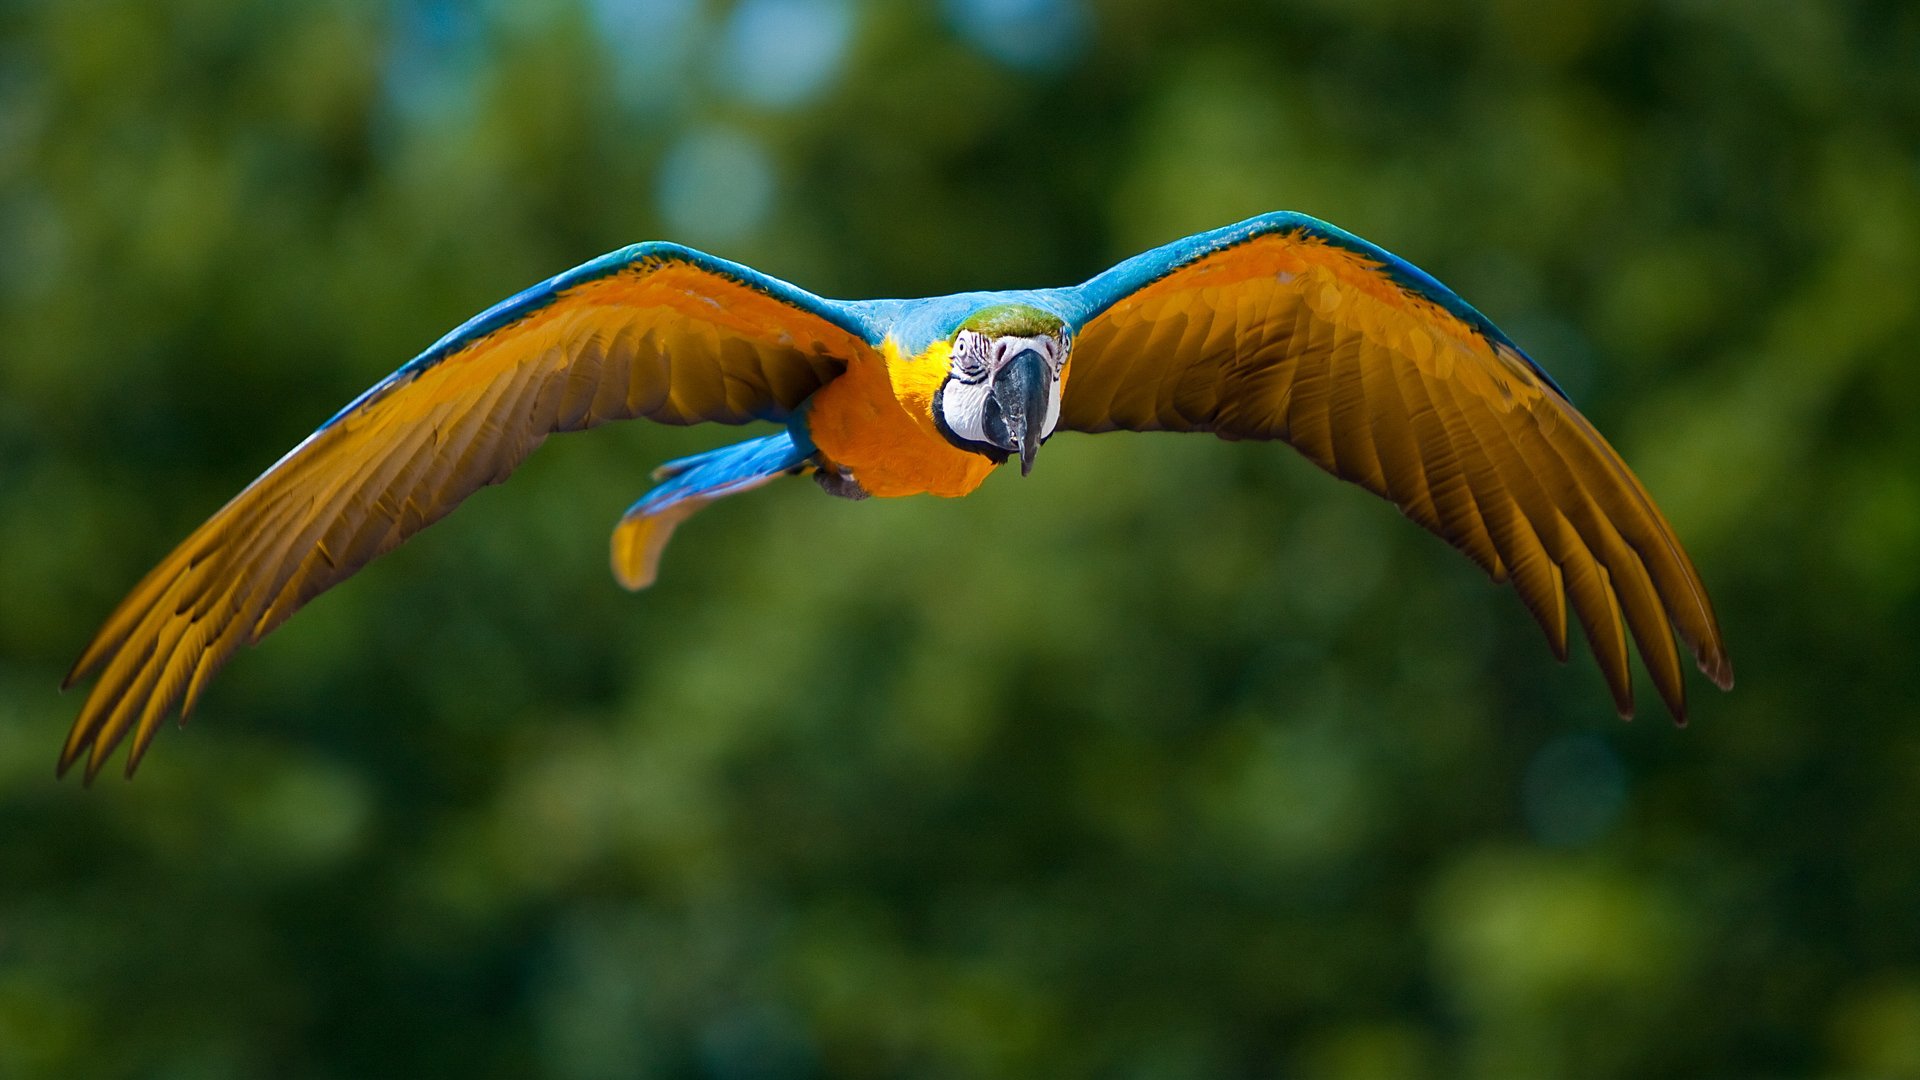 Download Animal Blue And Yellow Macaw Blue And Yellow Macaw Hd Wallpaper